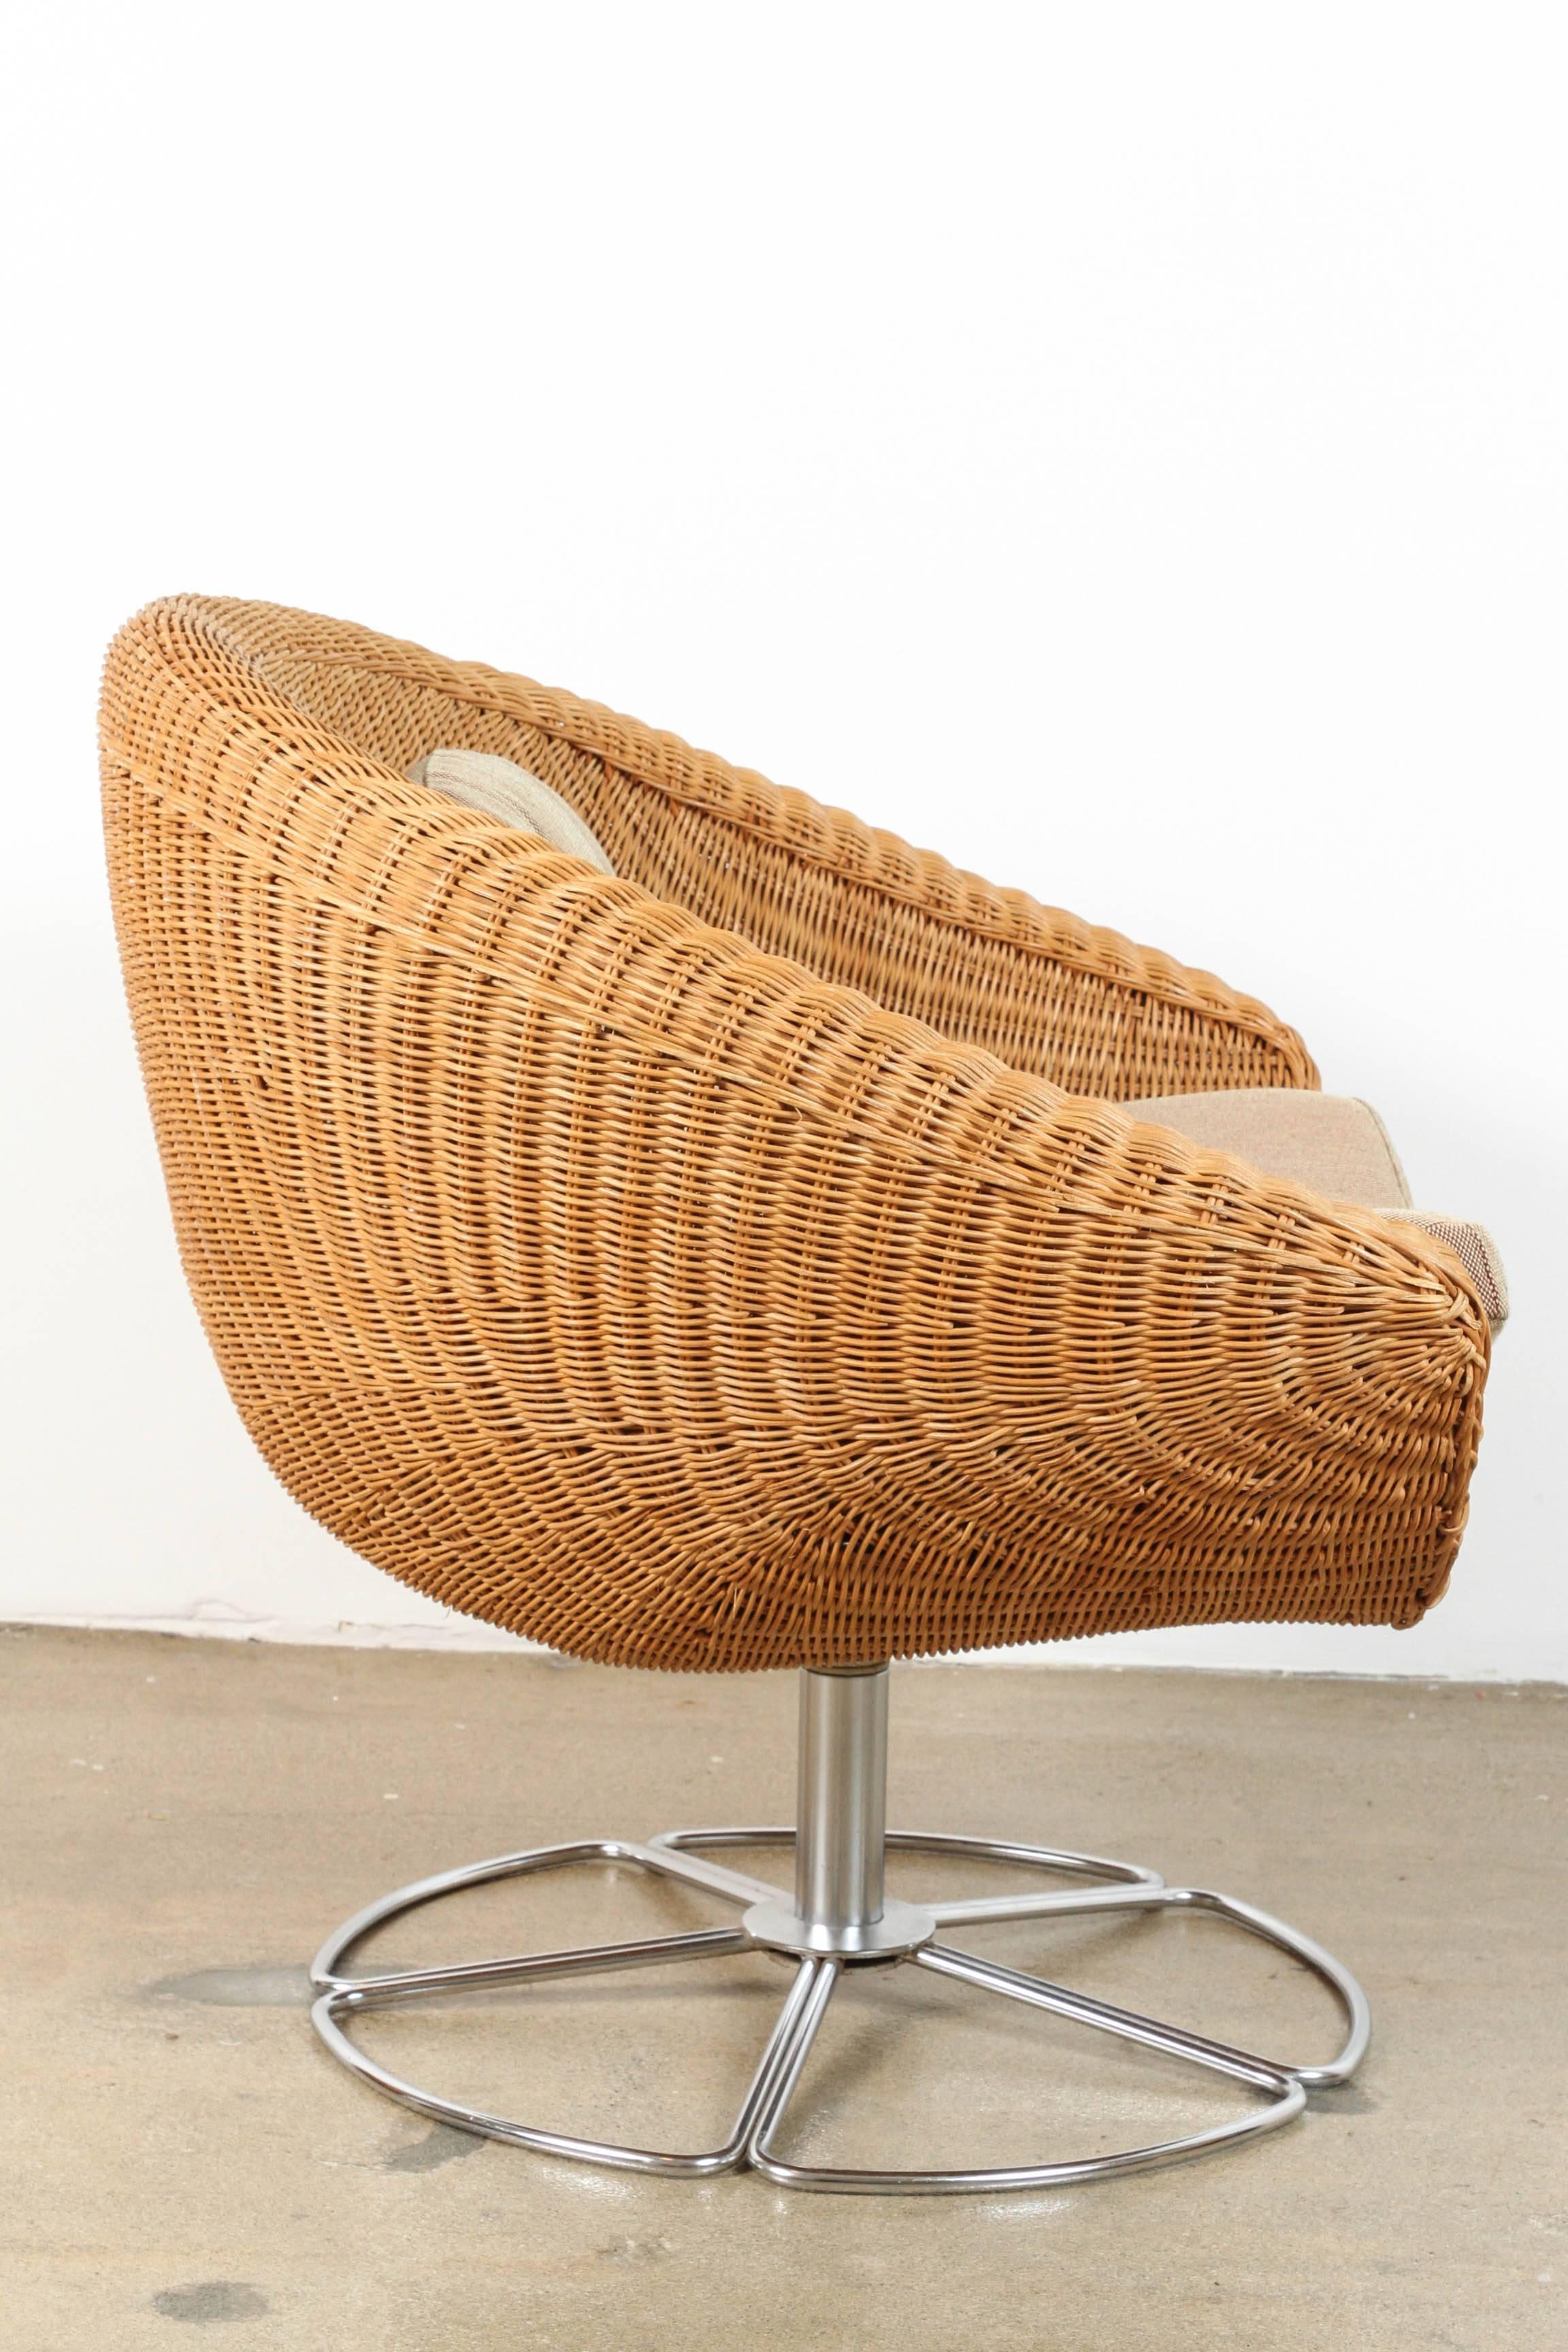 Pair of Vintage Wicker Swivel Chairs In Good Condition For Sale In Santa Monica, CA